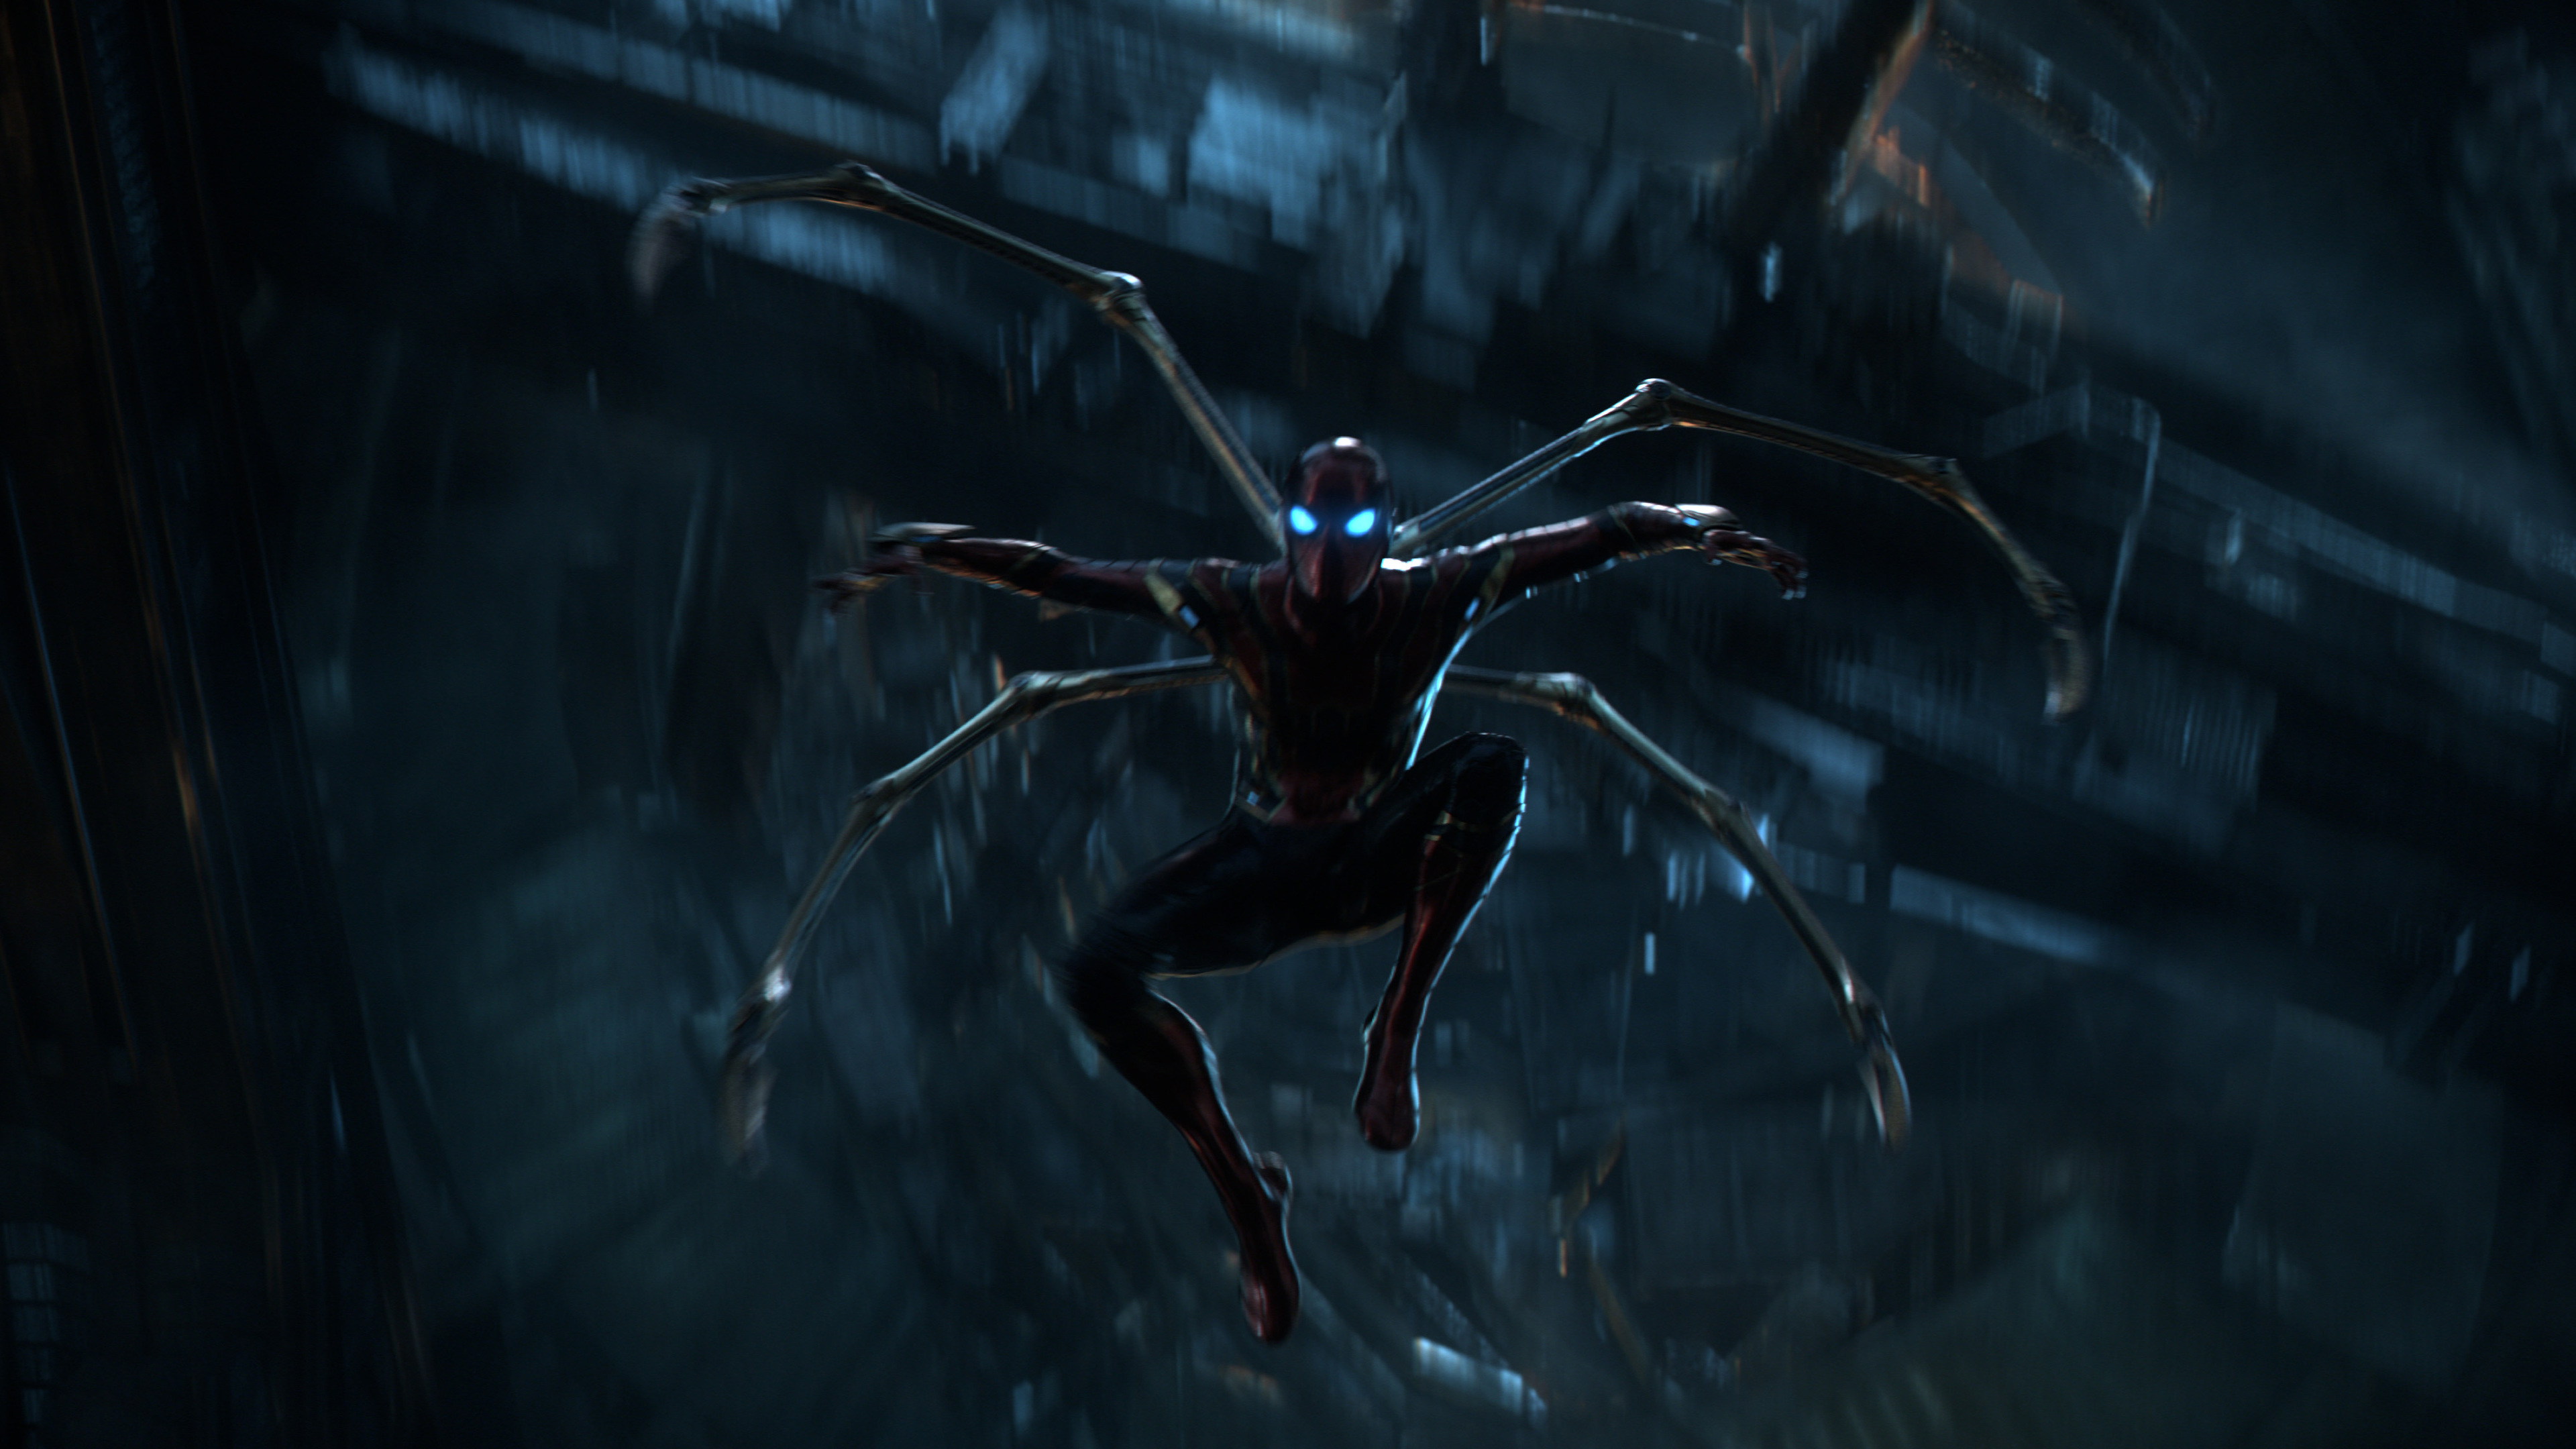 the iron spider stretches his legs in avengers infinity war 1537645639 - The Iron Spider Stretches His Legs In Avengers Infinity War - spiderman wallpapers, infinity-war-wallpapers, hd-wallpapers, avengers-infinity-war-wallpapers, 4k-wallpapers, 2018-movies-wallpapers